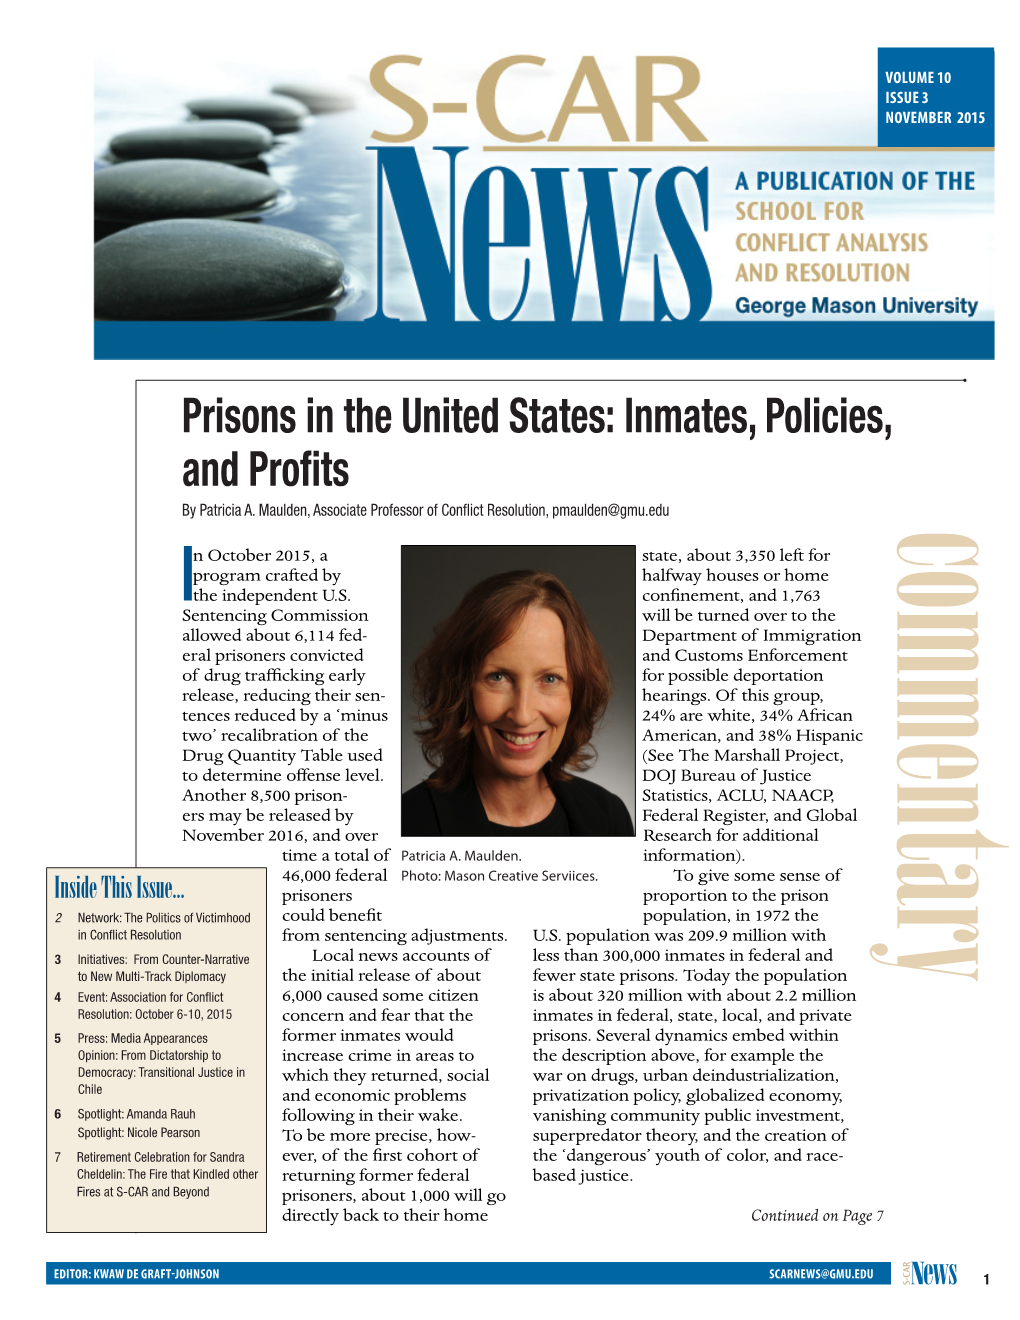 Prisons in the United States: Inmates, Policies, and Profits by Patricia A